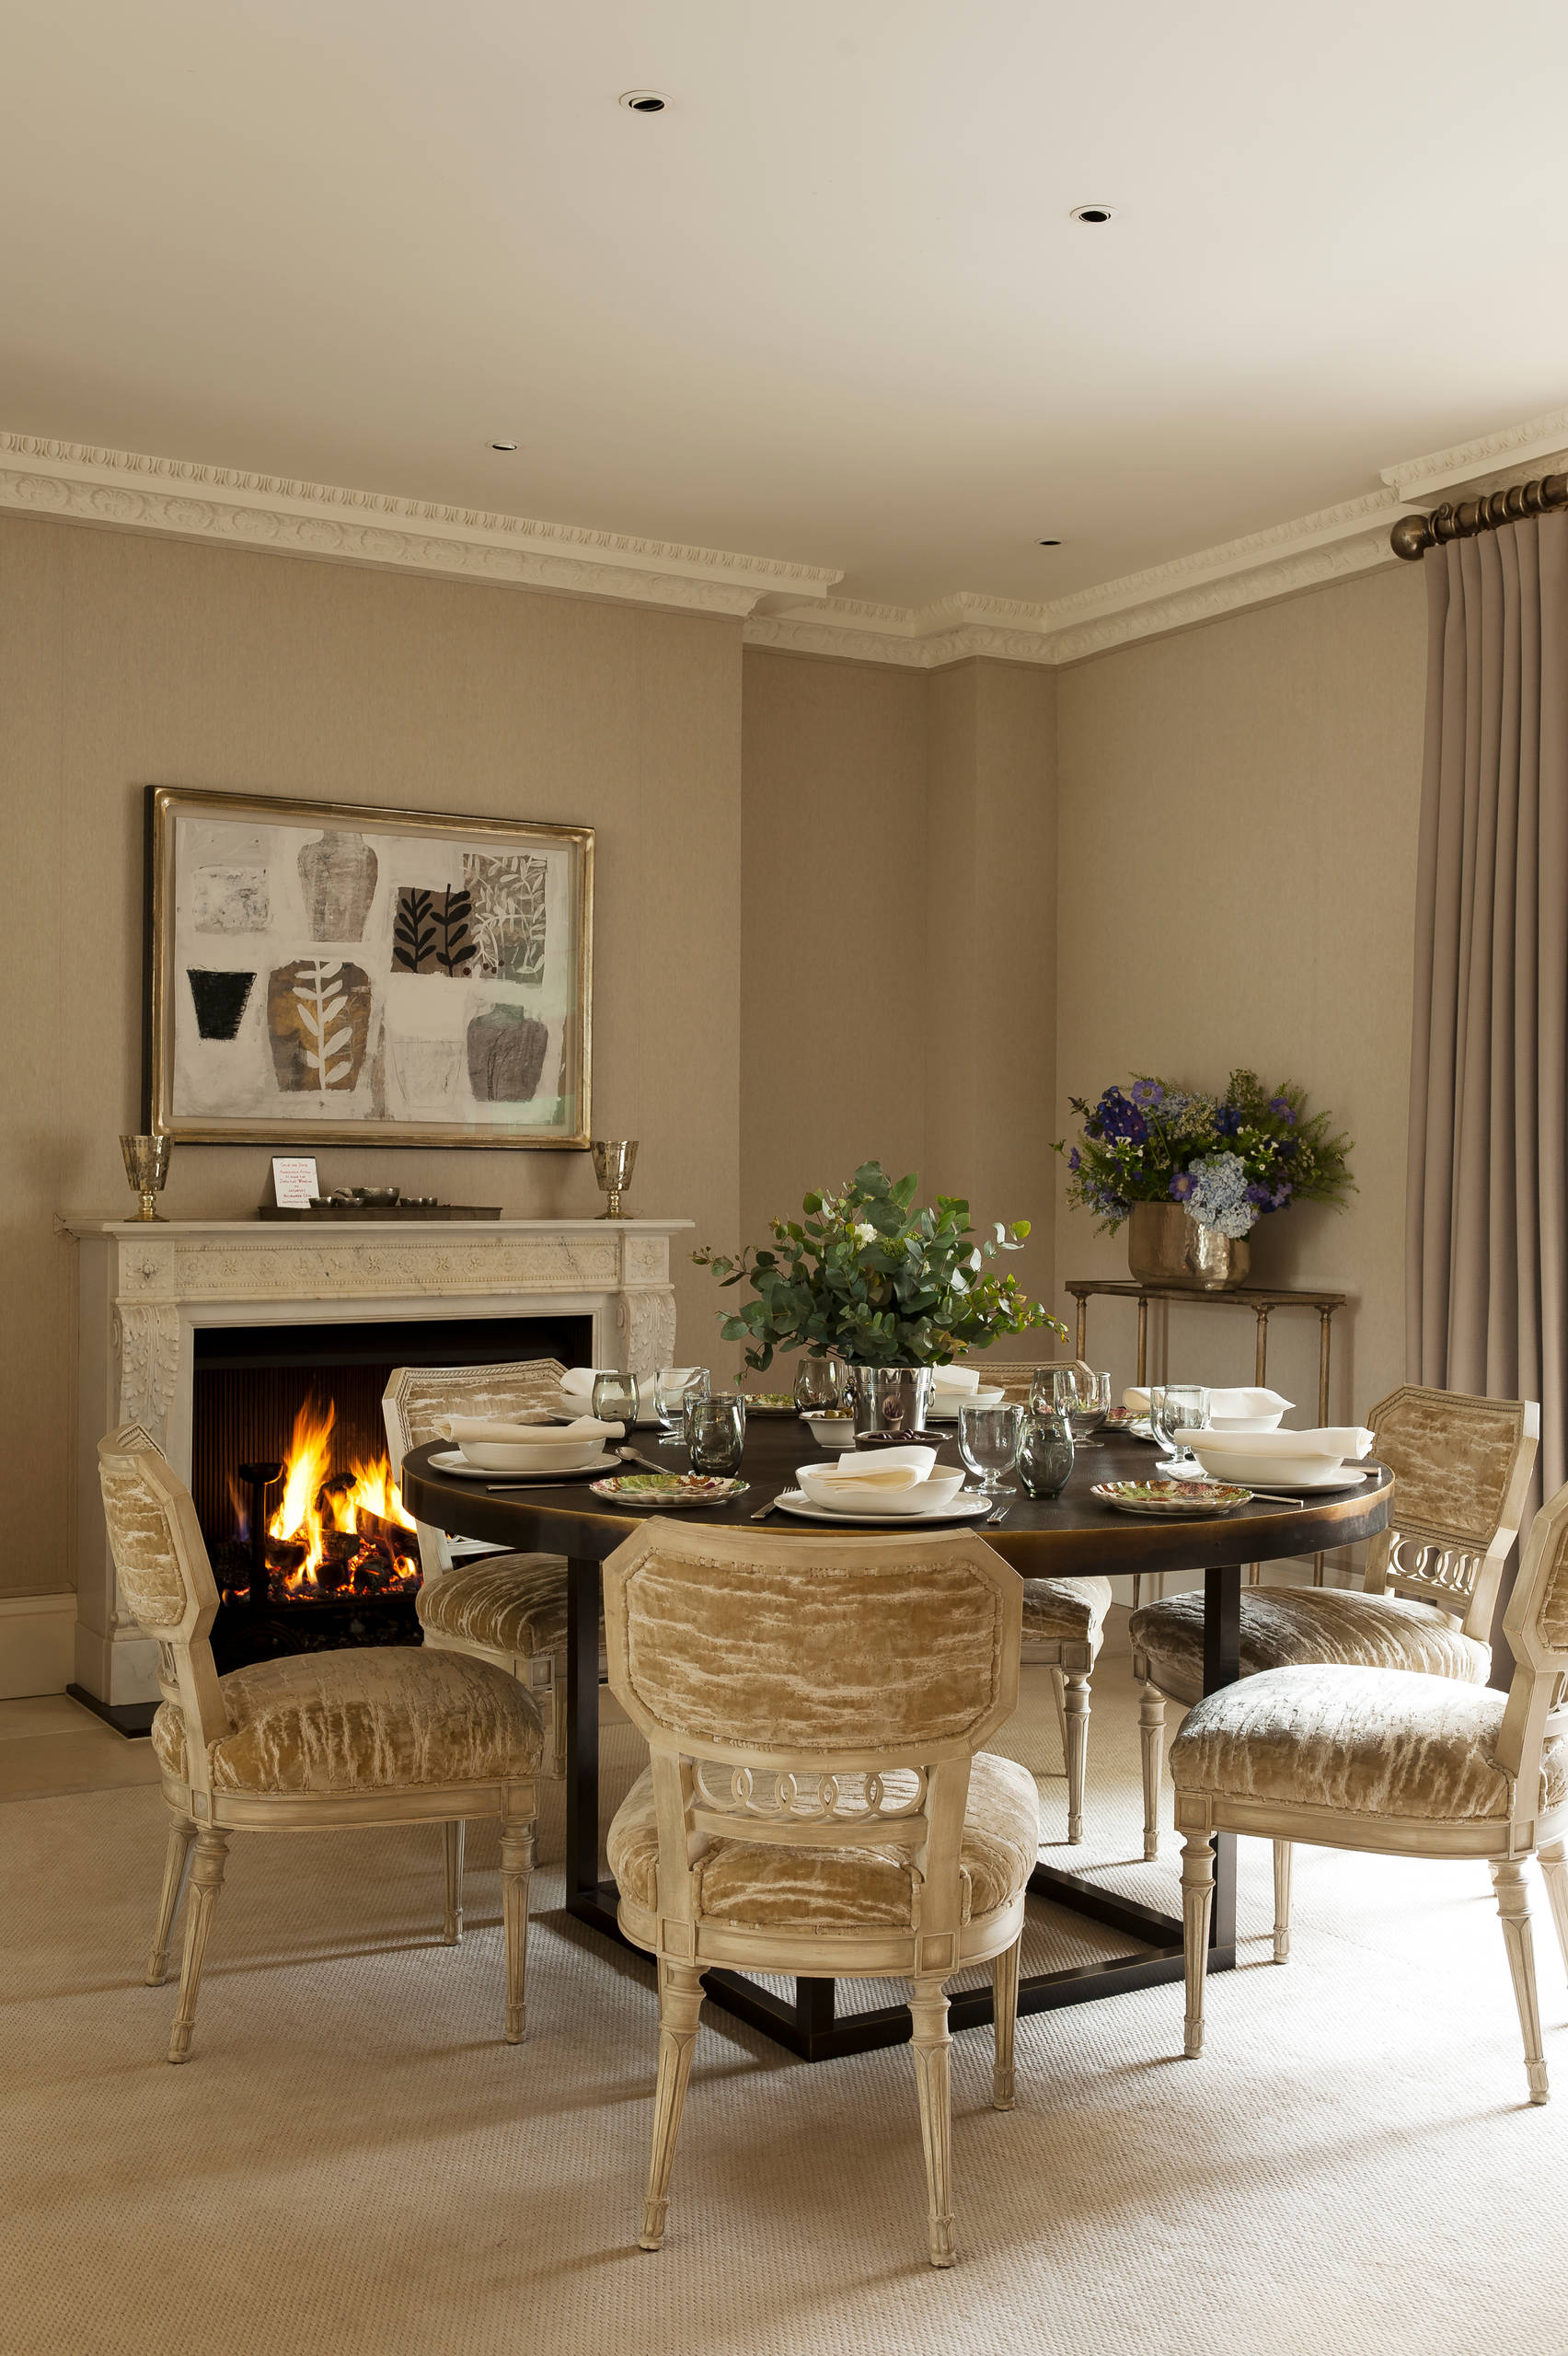 Dining Table By Fireplace - Photos & Ideas | Houzz